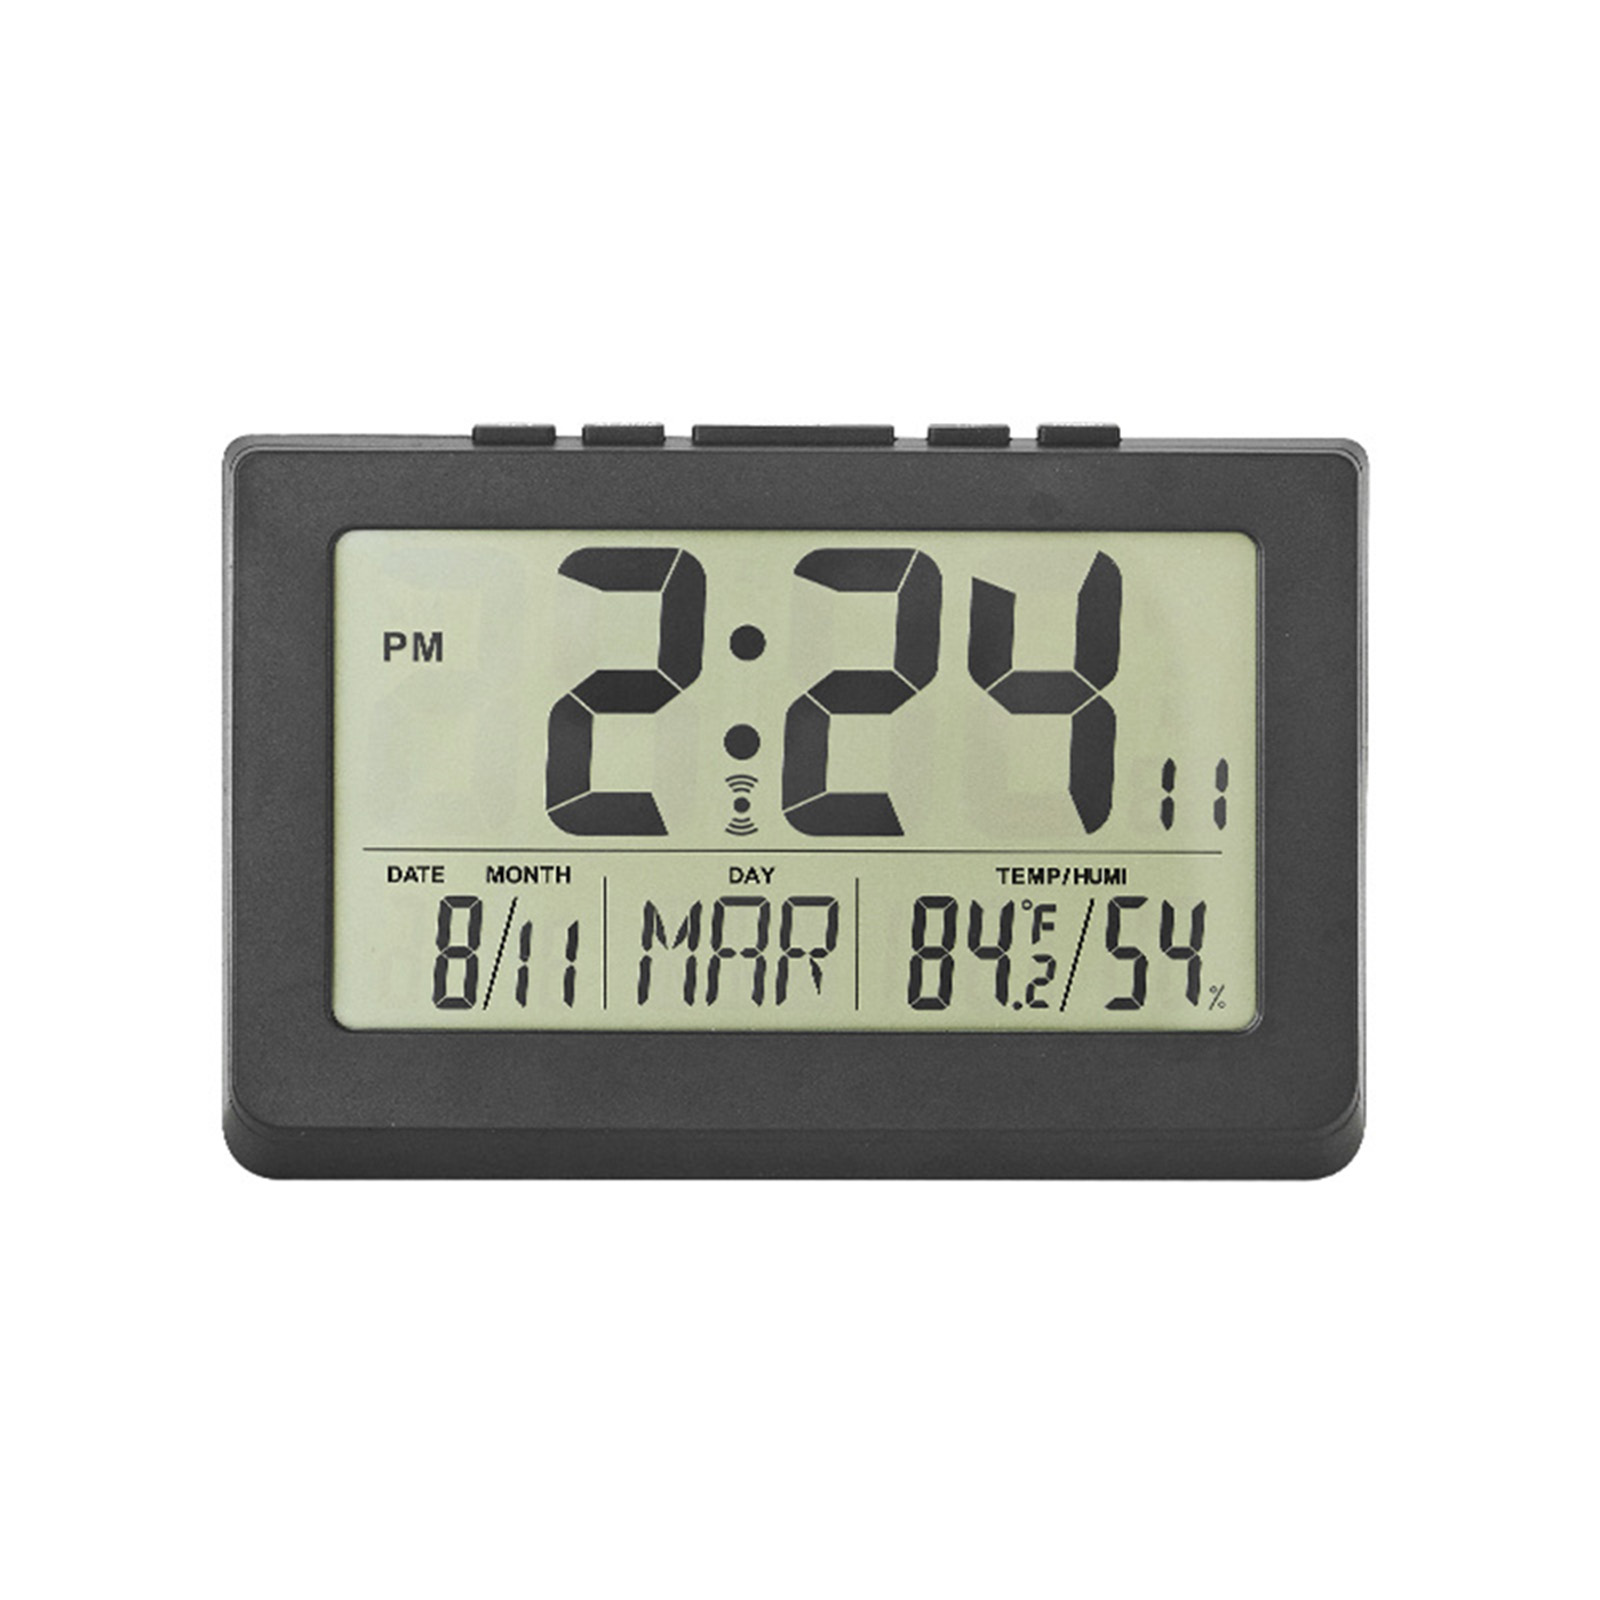 Led Alarm Clock Time Date Temperature Humidity Display Desk Clock For Bedroom Home Office Decor (21x14x2.5cm)